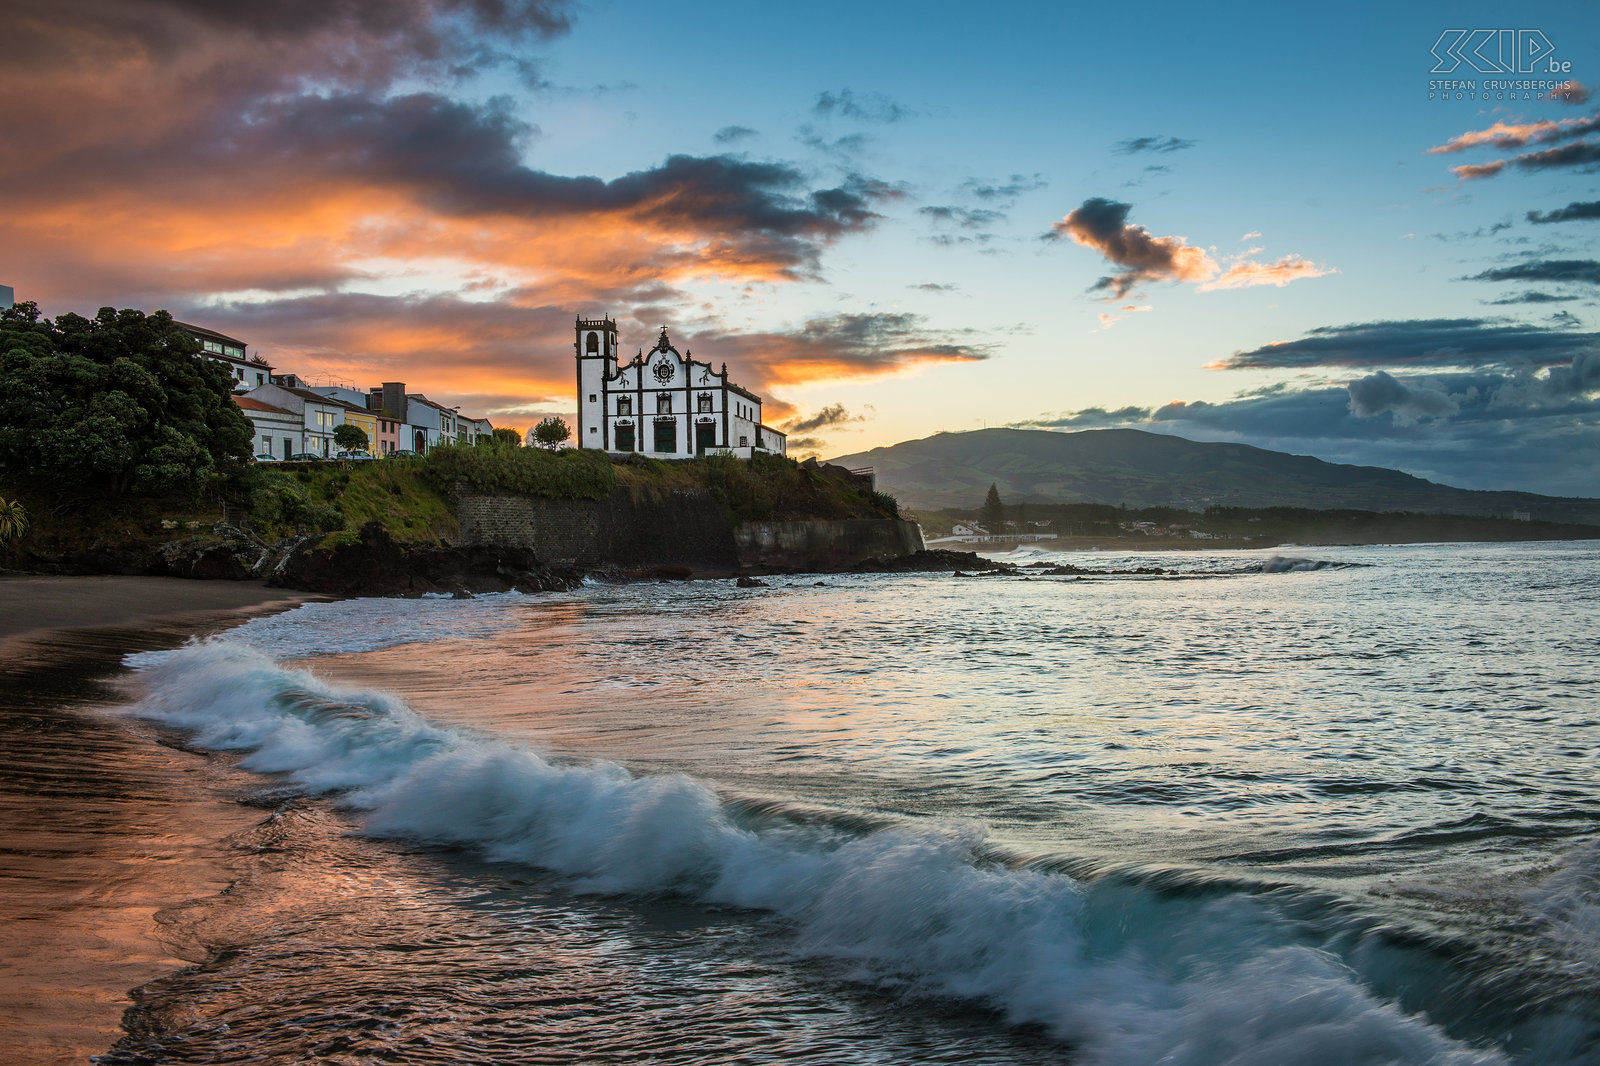 Sunrise Sao Roque A wonderful sunrise at the black sandy beach of São Roque with the church in the background. São Roque is a civil parish in the municipality of Ponta Delgada, the administrative capital of the Azores. The beautiful church (ingreja) of São Roque is perched above the ocean and separates two beaches. Stefan Cruysberghs